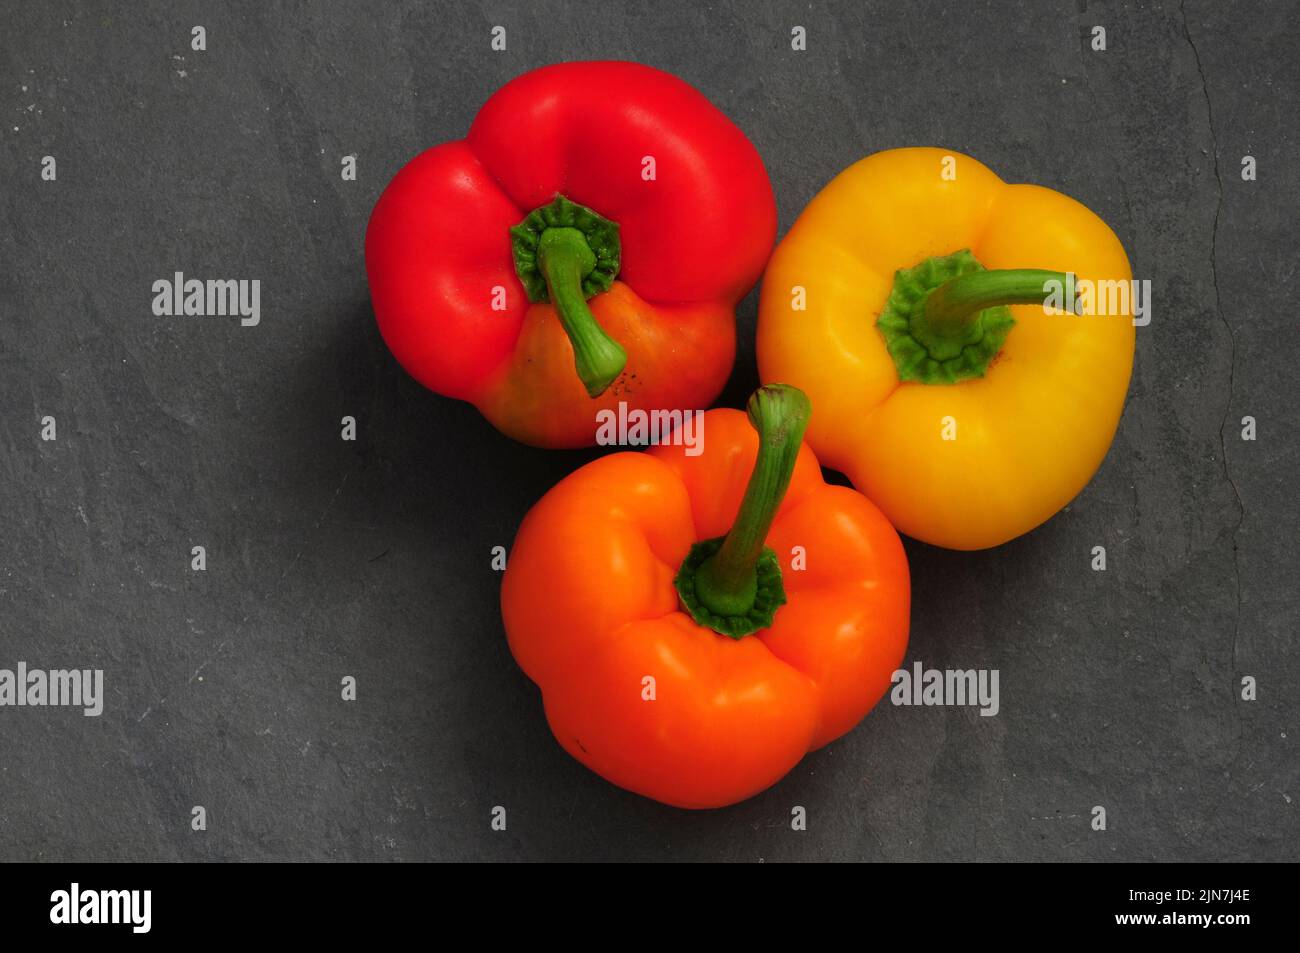 Assortment of red, orange and yellow peppers. Stock Photo